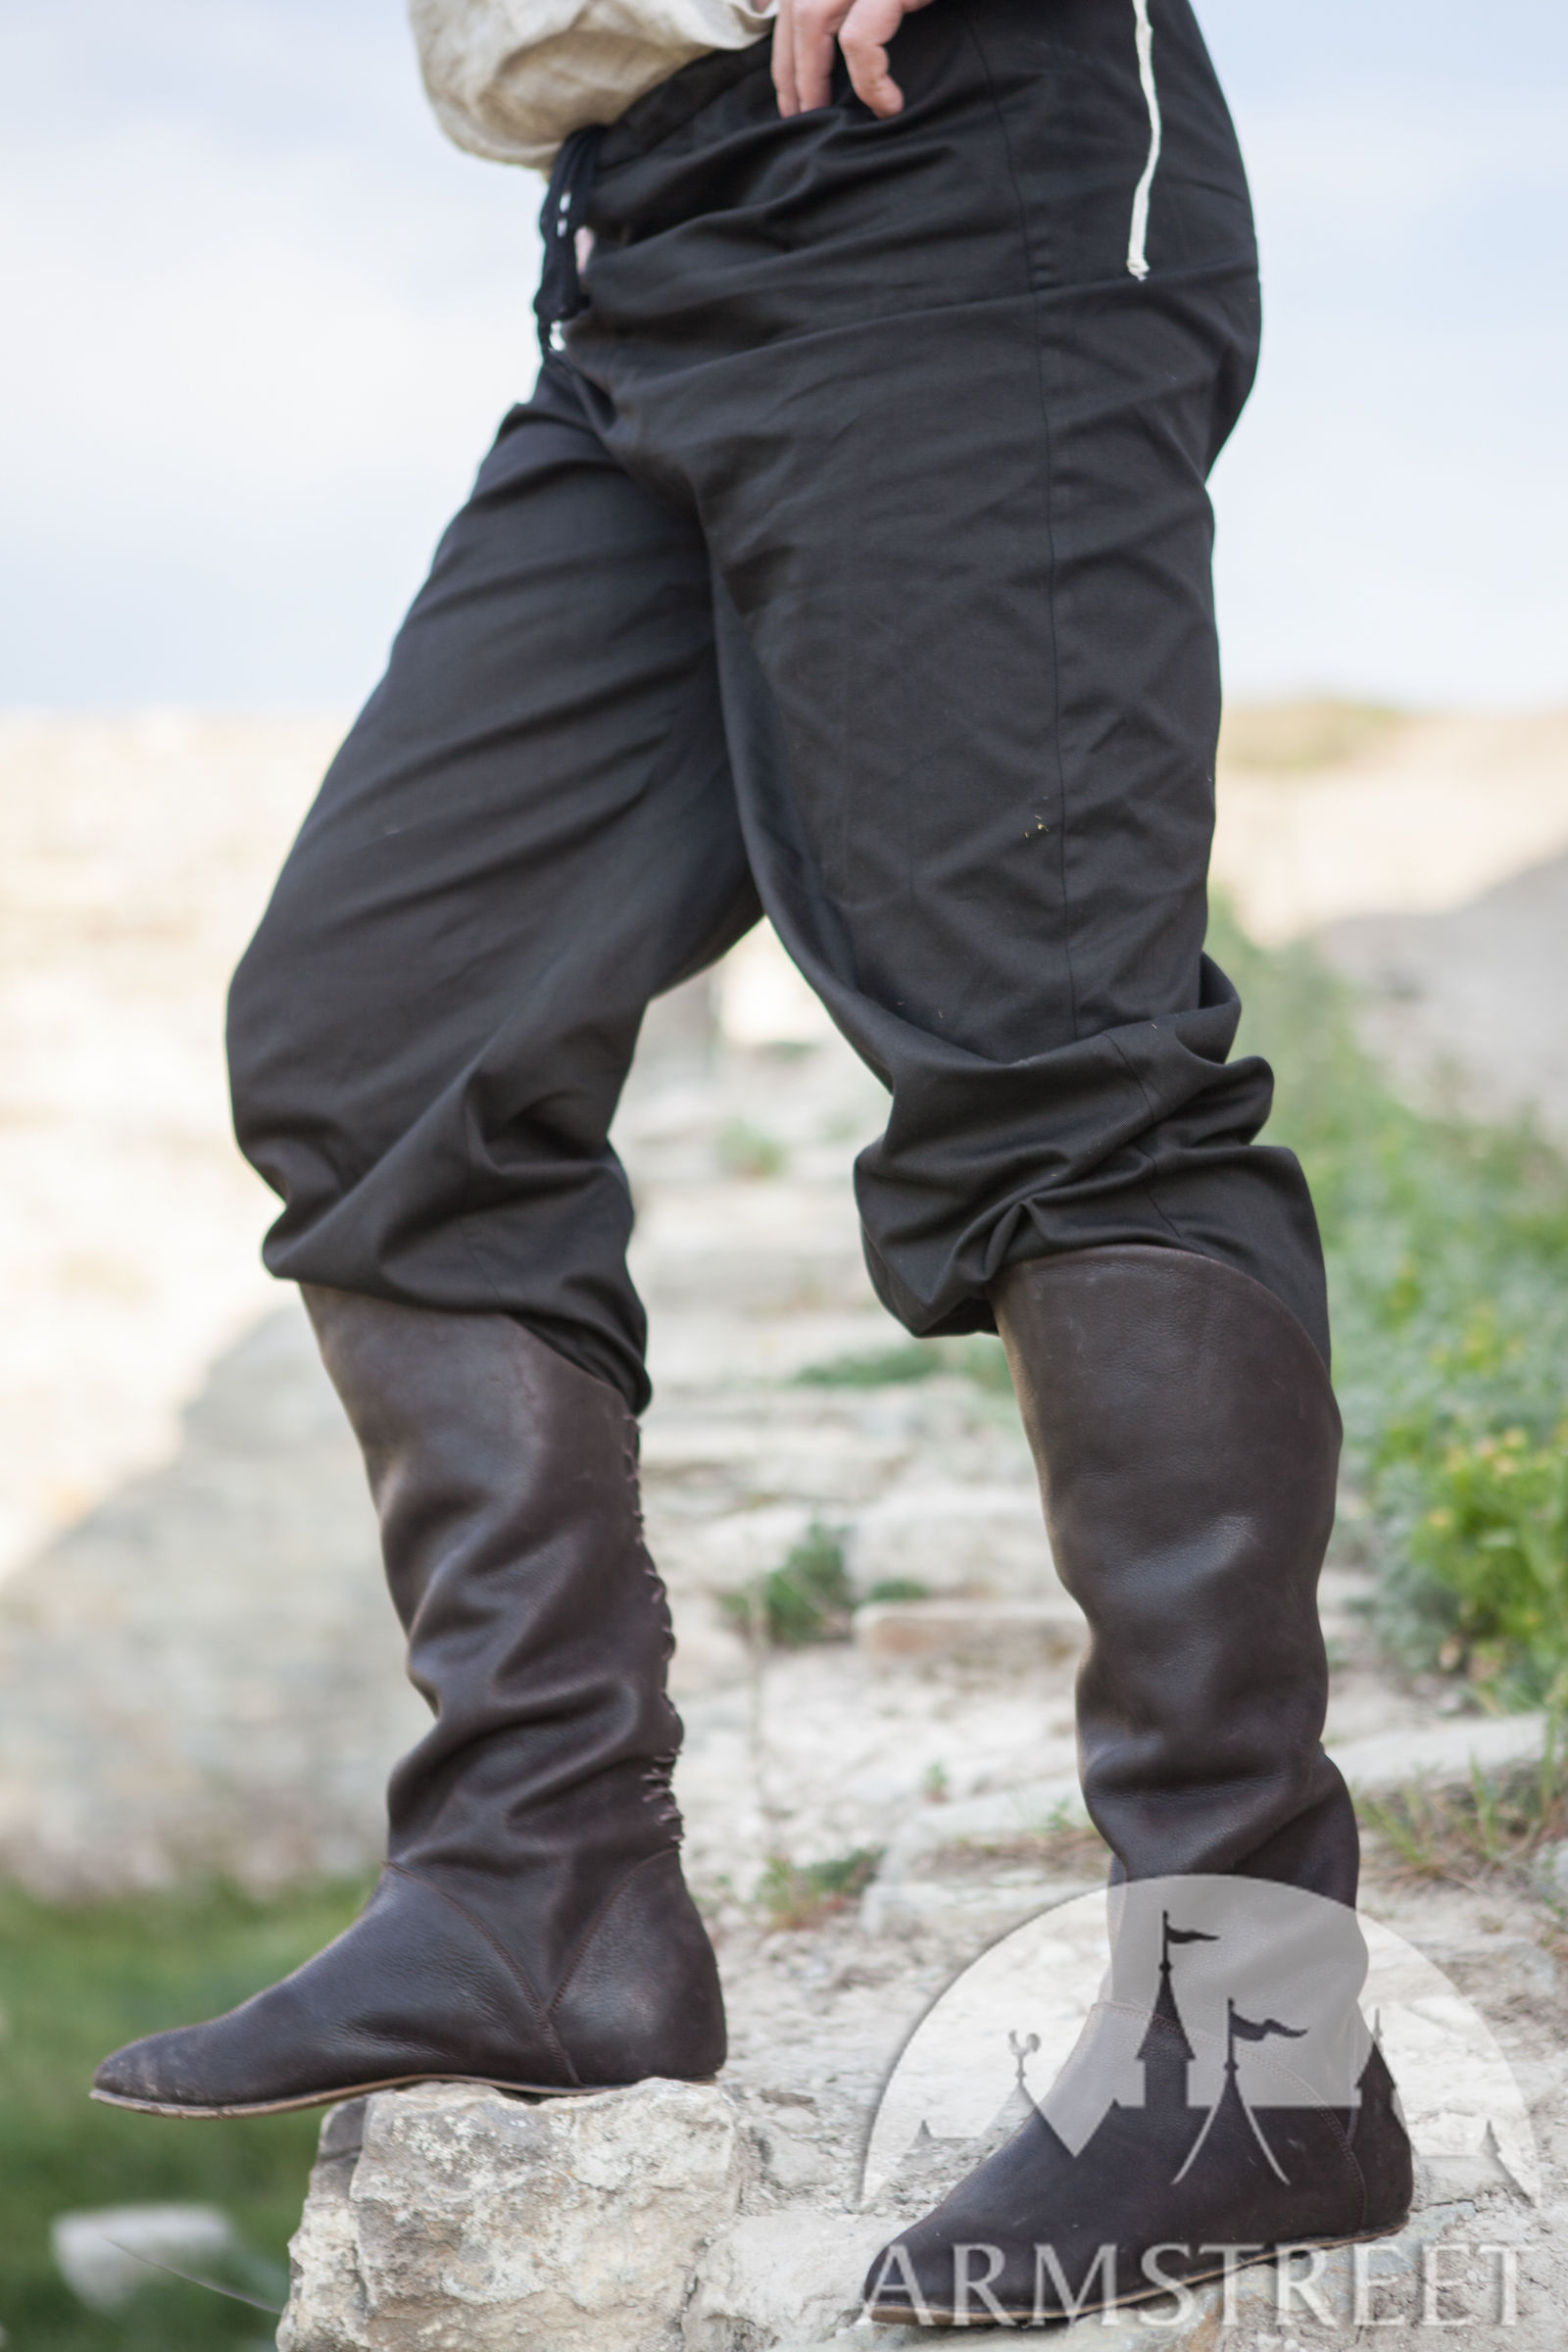 Medieval leather boots . Available in 